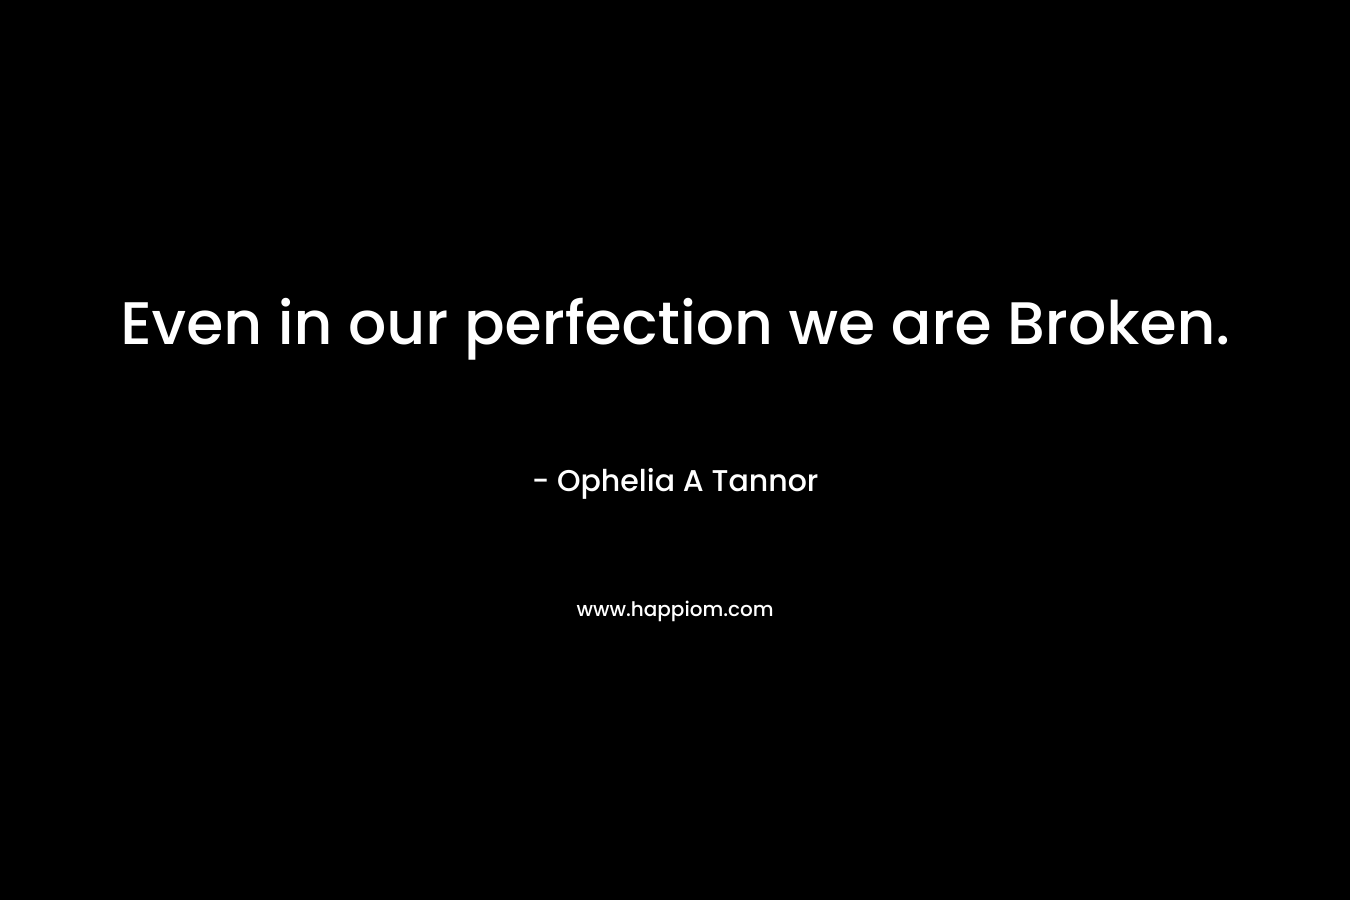 Even in our perfection we are Broken. – Ophelia A Tannor